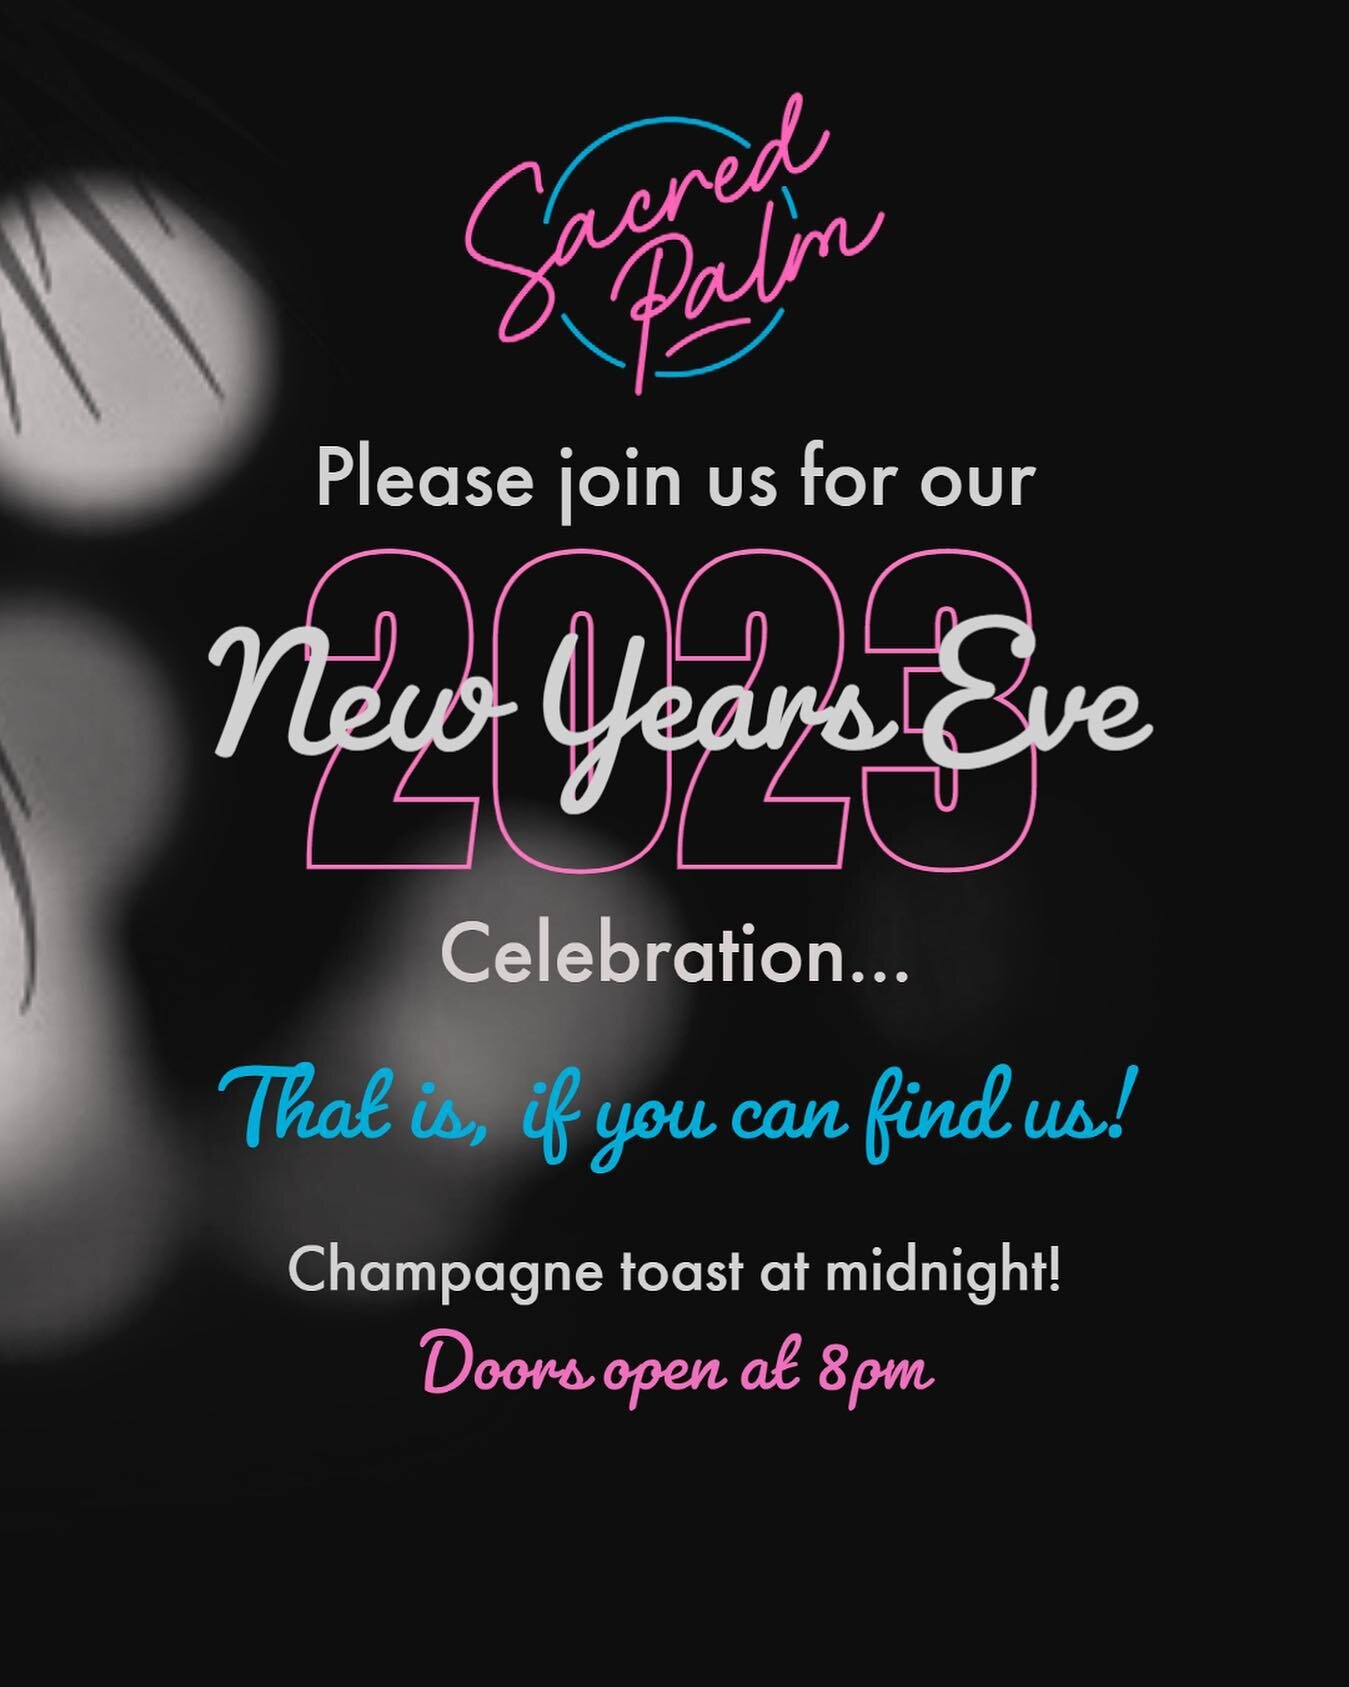 Can you believe that we are just days away from ringing in the New Year!?! Ya, we can&rsquo;t believe it either! Please join us this Saturday for a Tiki Filled NYE Celebration! Doors open at 8pm and Champagne Toast at Midnight! 🍾🥂🍾🥂